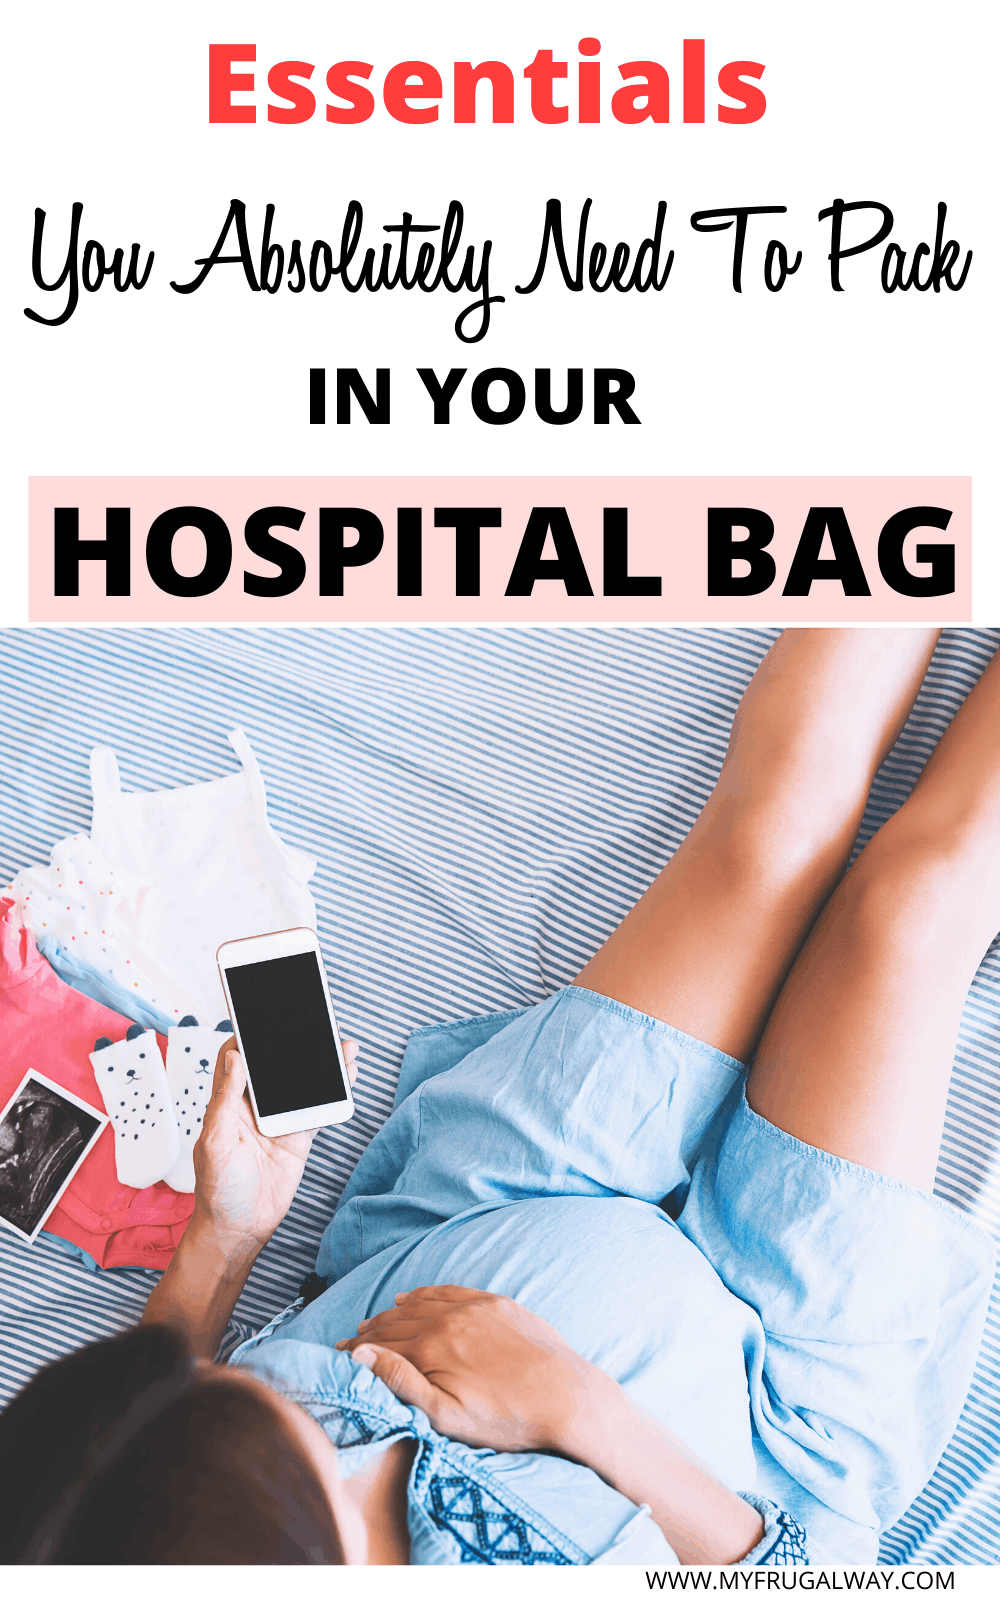 Hospital bag essentials to pack for mom to be. Deciding what to pack in your hospital bag for labor, This minimalist checklist will help you decide what to pack in the hospital bag for mom and baby. #postpartum #firstmom #laboranddelivery #whattopack #momlife #parenting